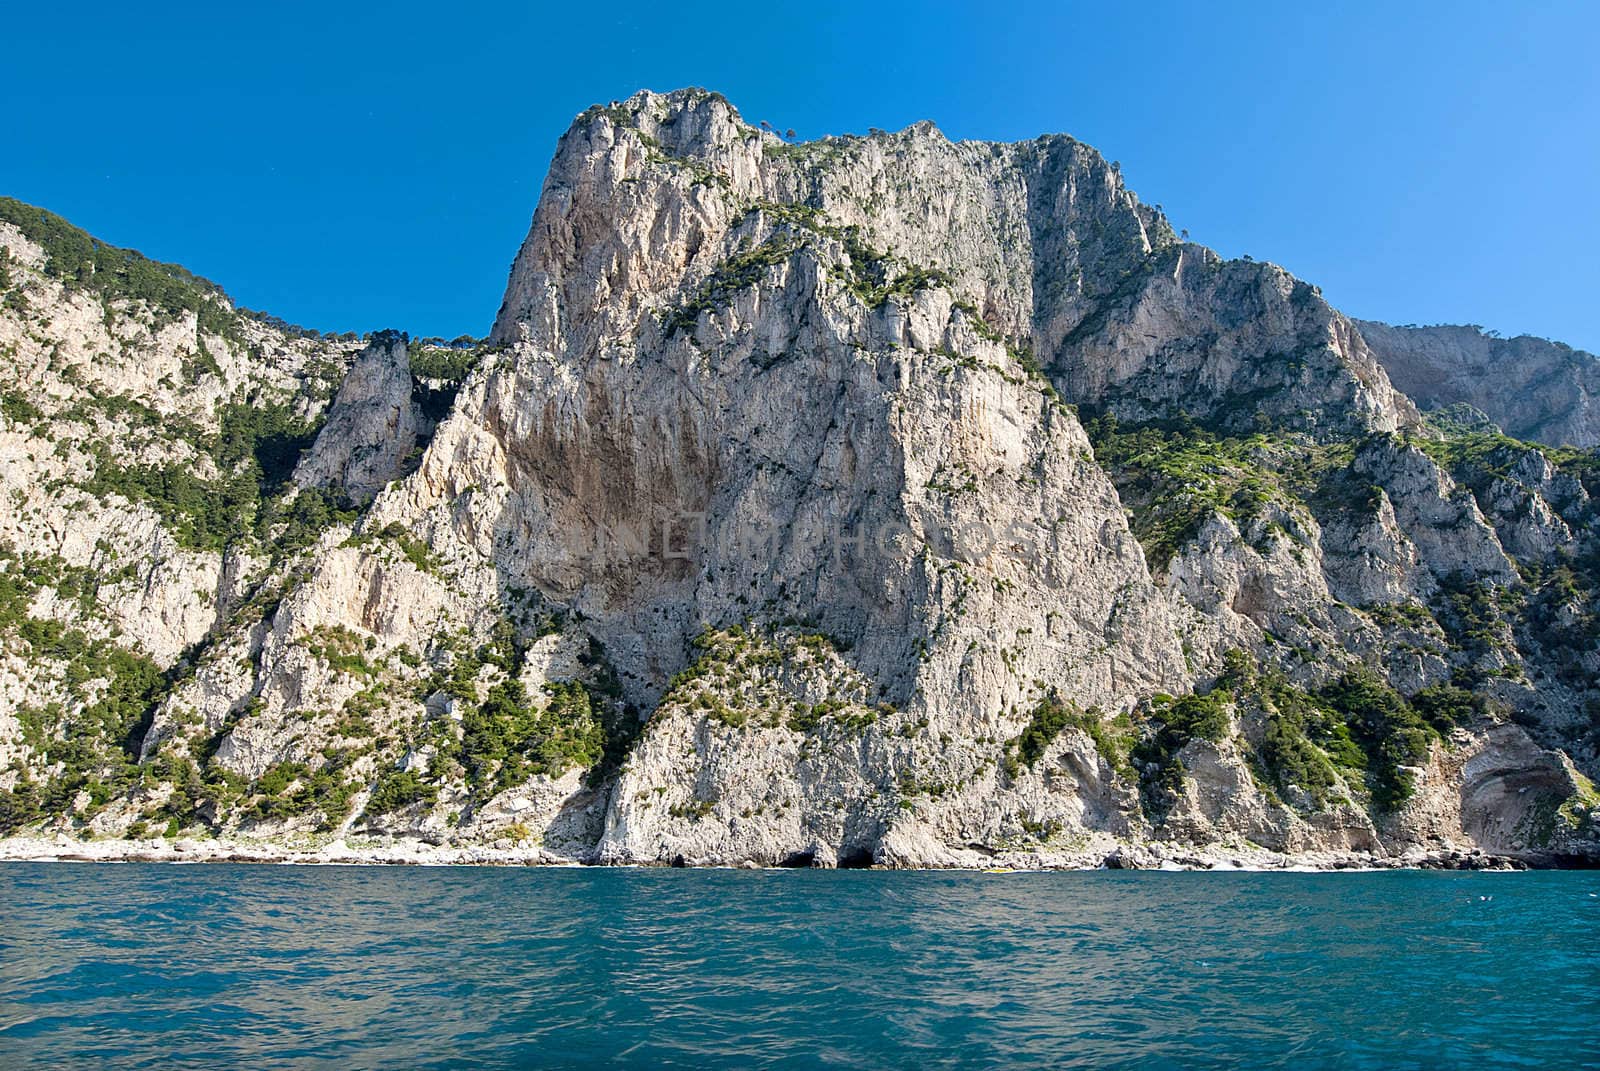 sheer cliffs of capri falling into turqoise mediterannean  sea, italy by itsrich